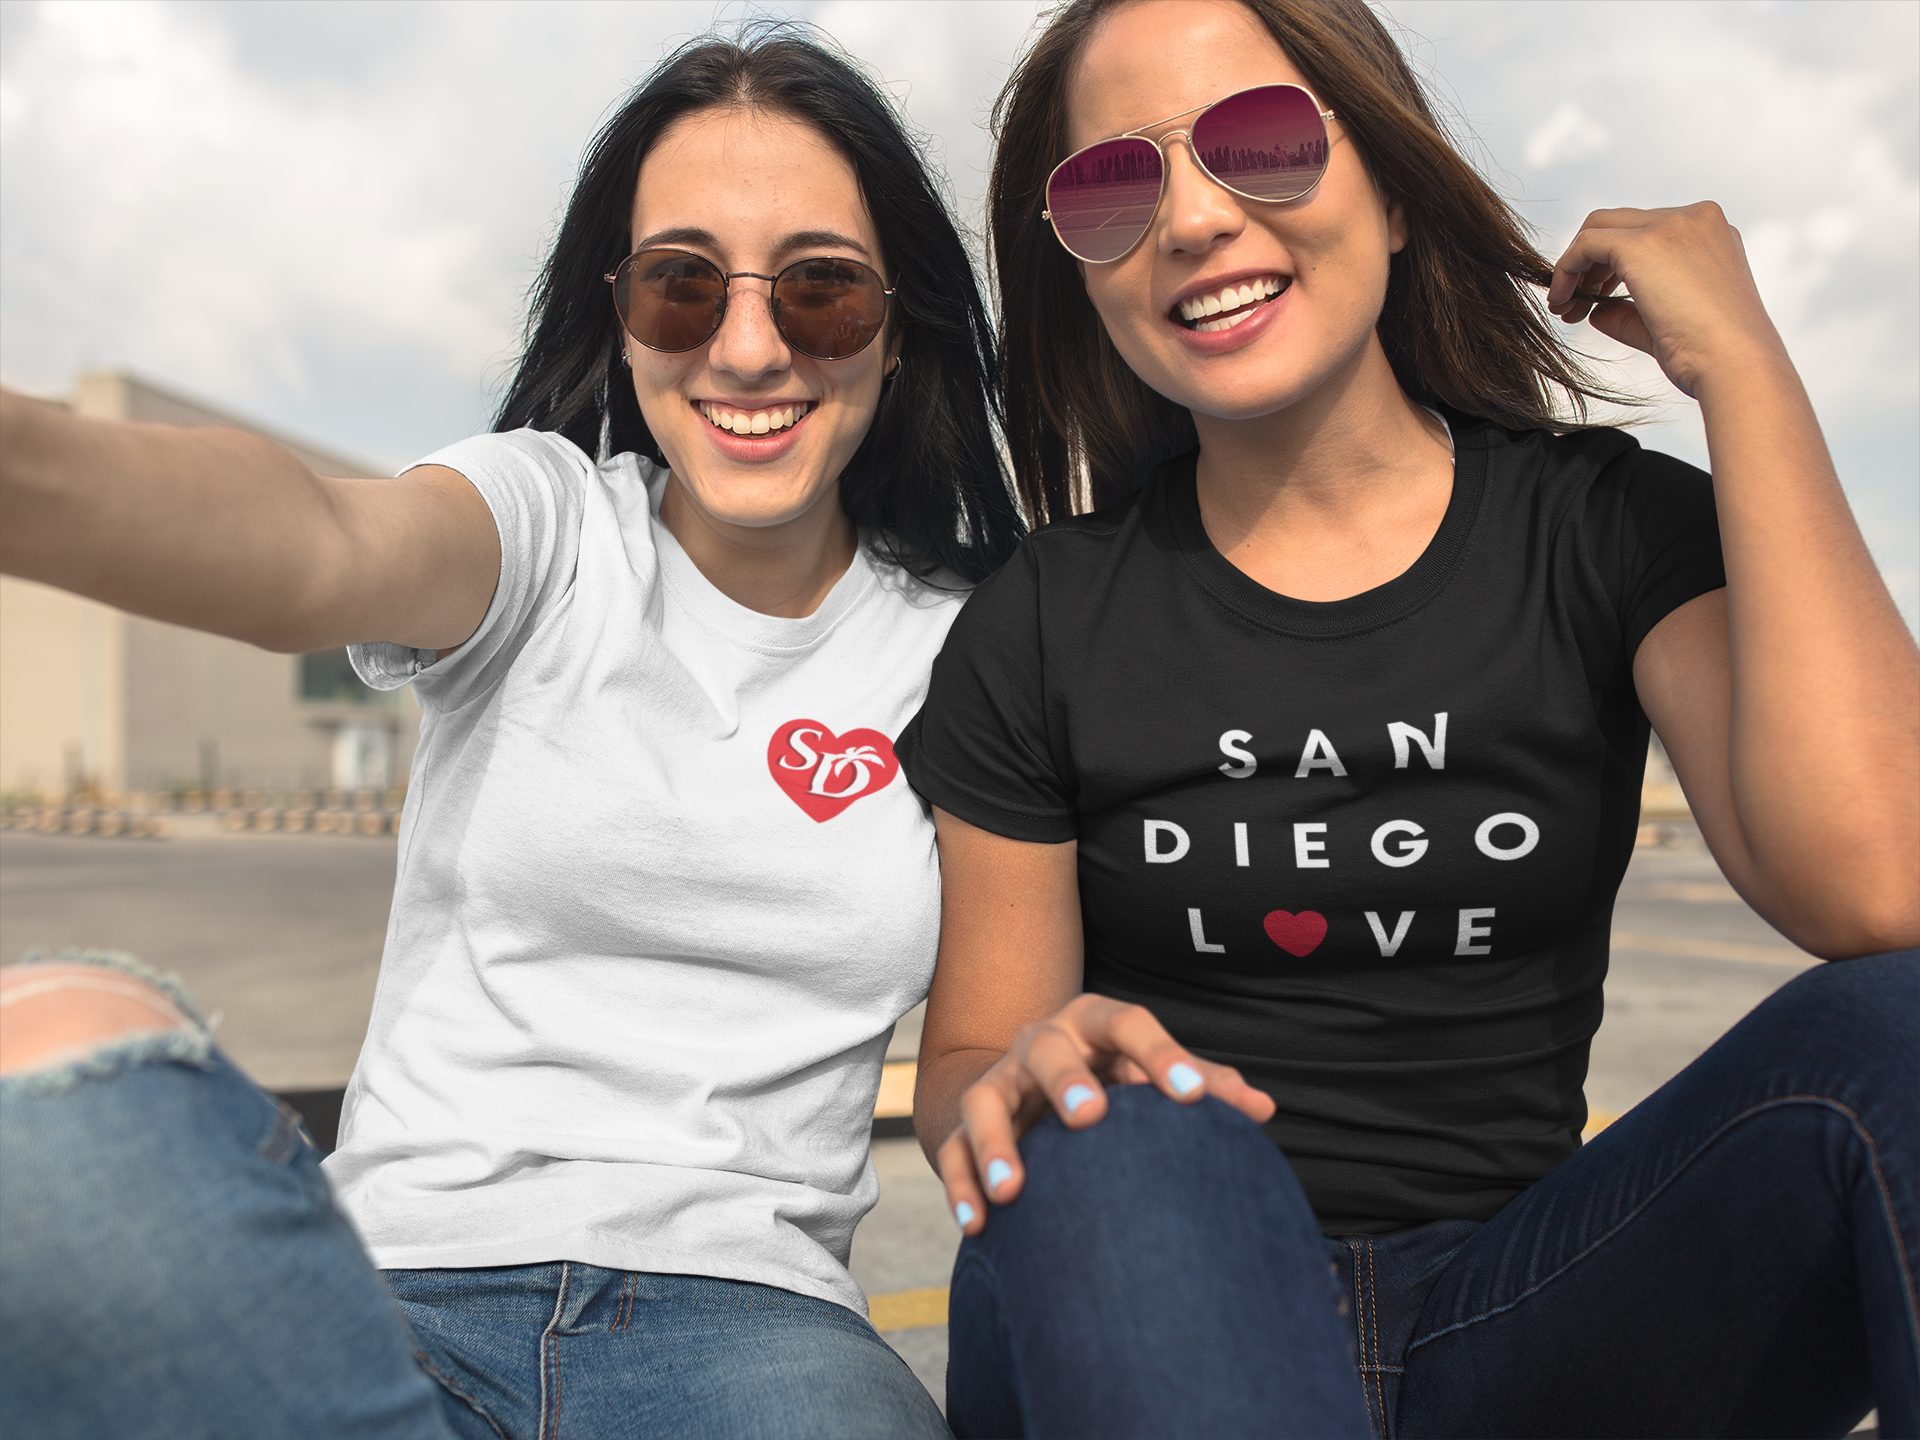 Two smiling women with sunglasses taking a selfie while wearing San Diego t-shirts.